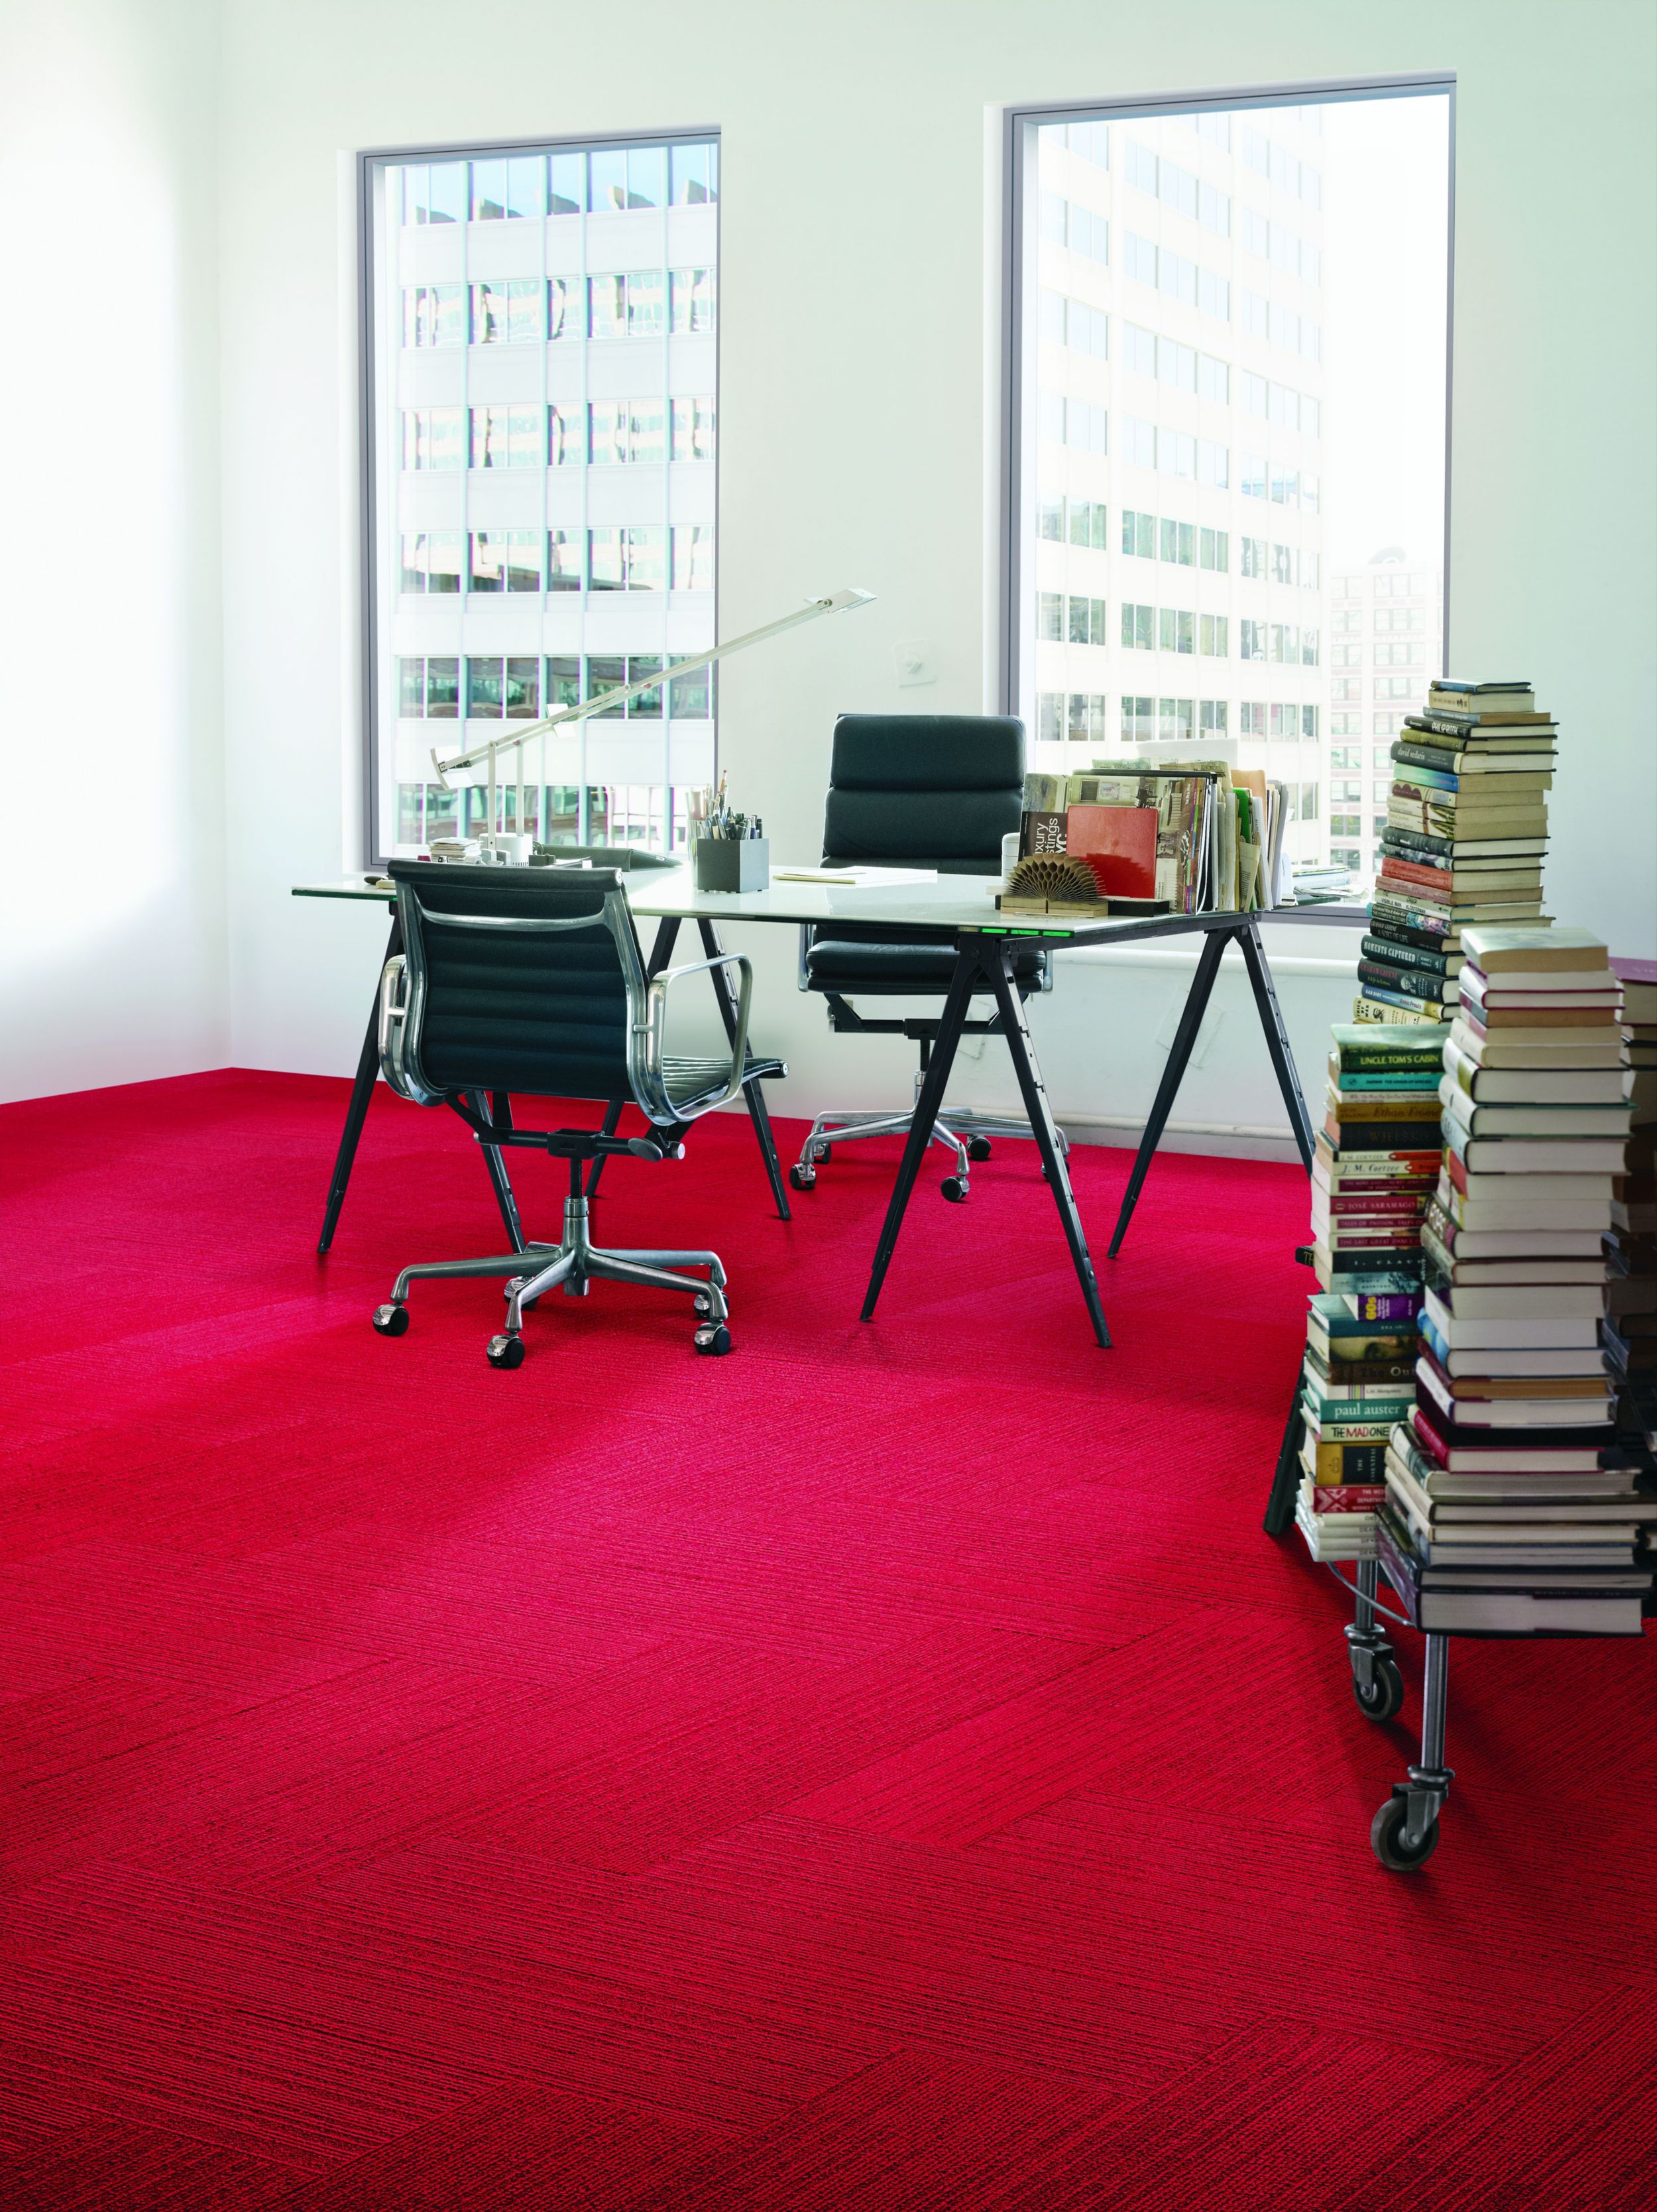 Interface On Line plank carpet tile in space with desk and stacks of books against wall Bildnummer 5